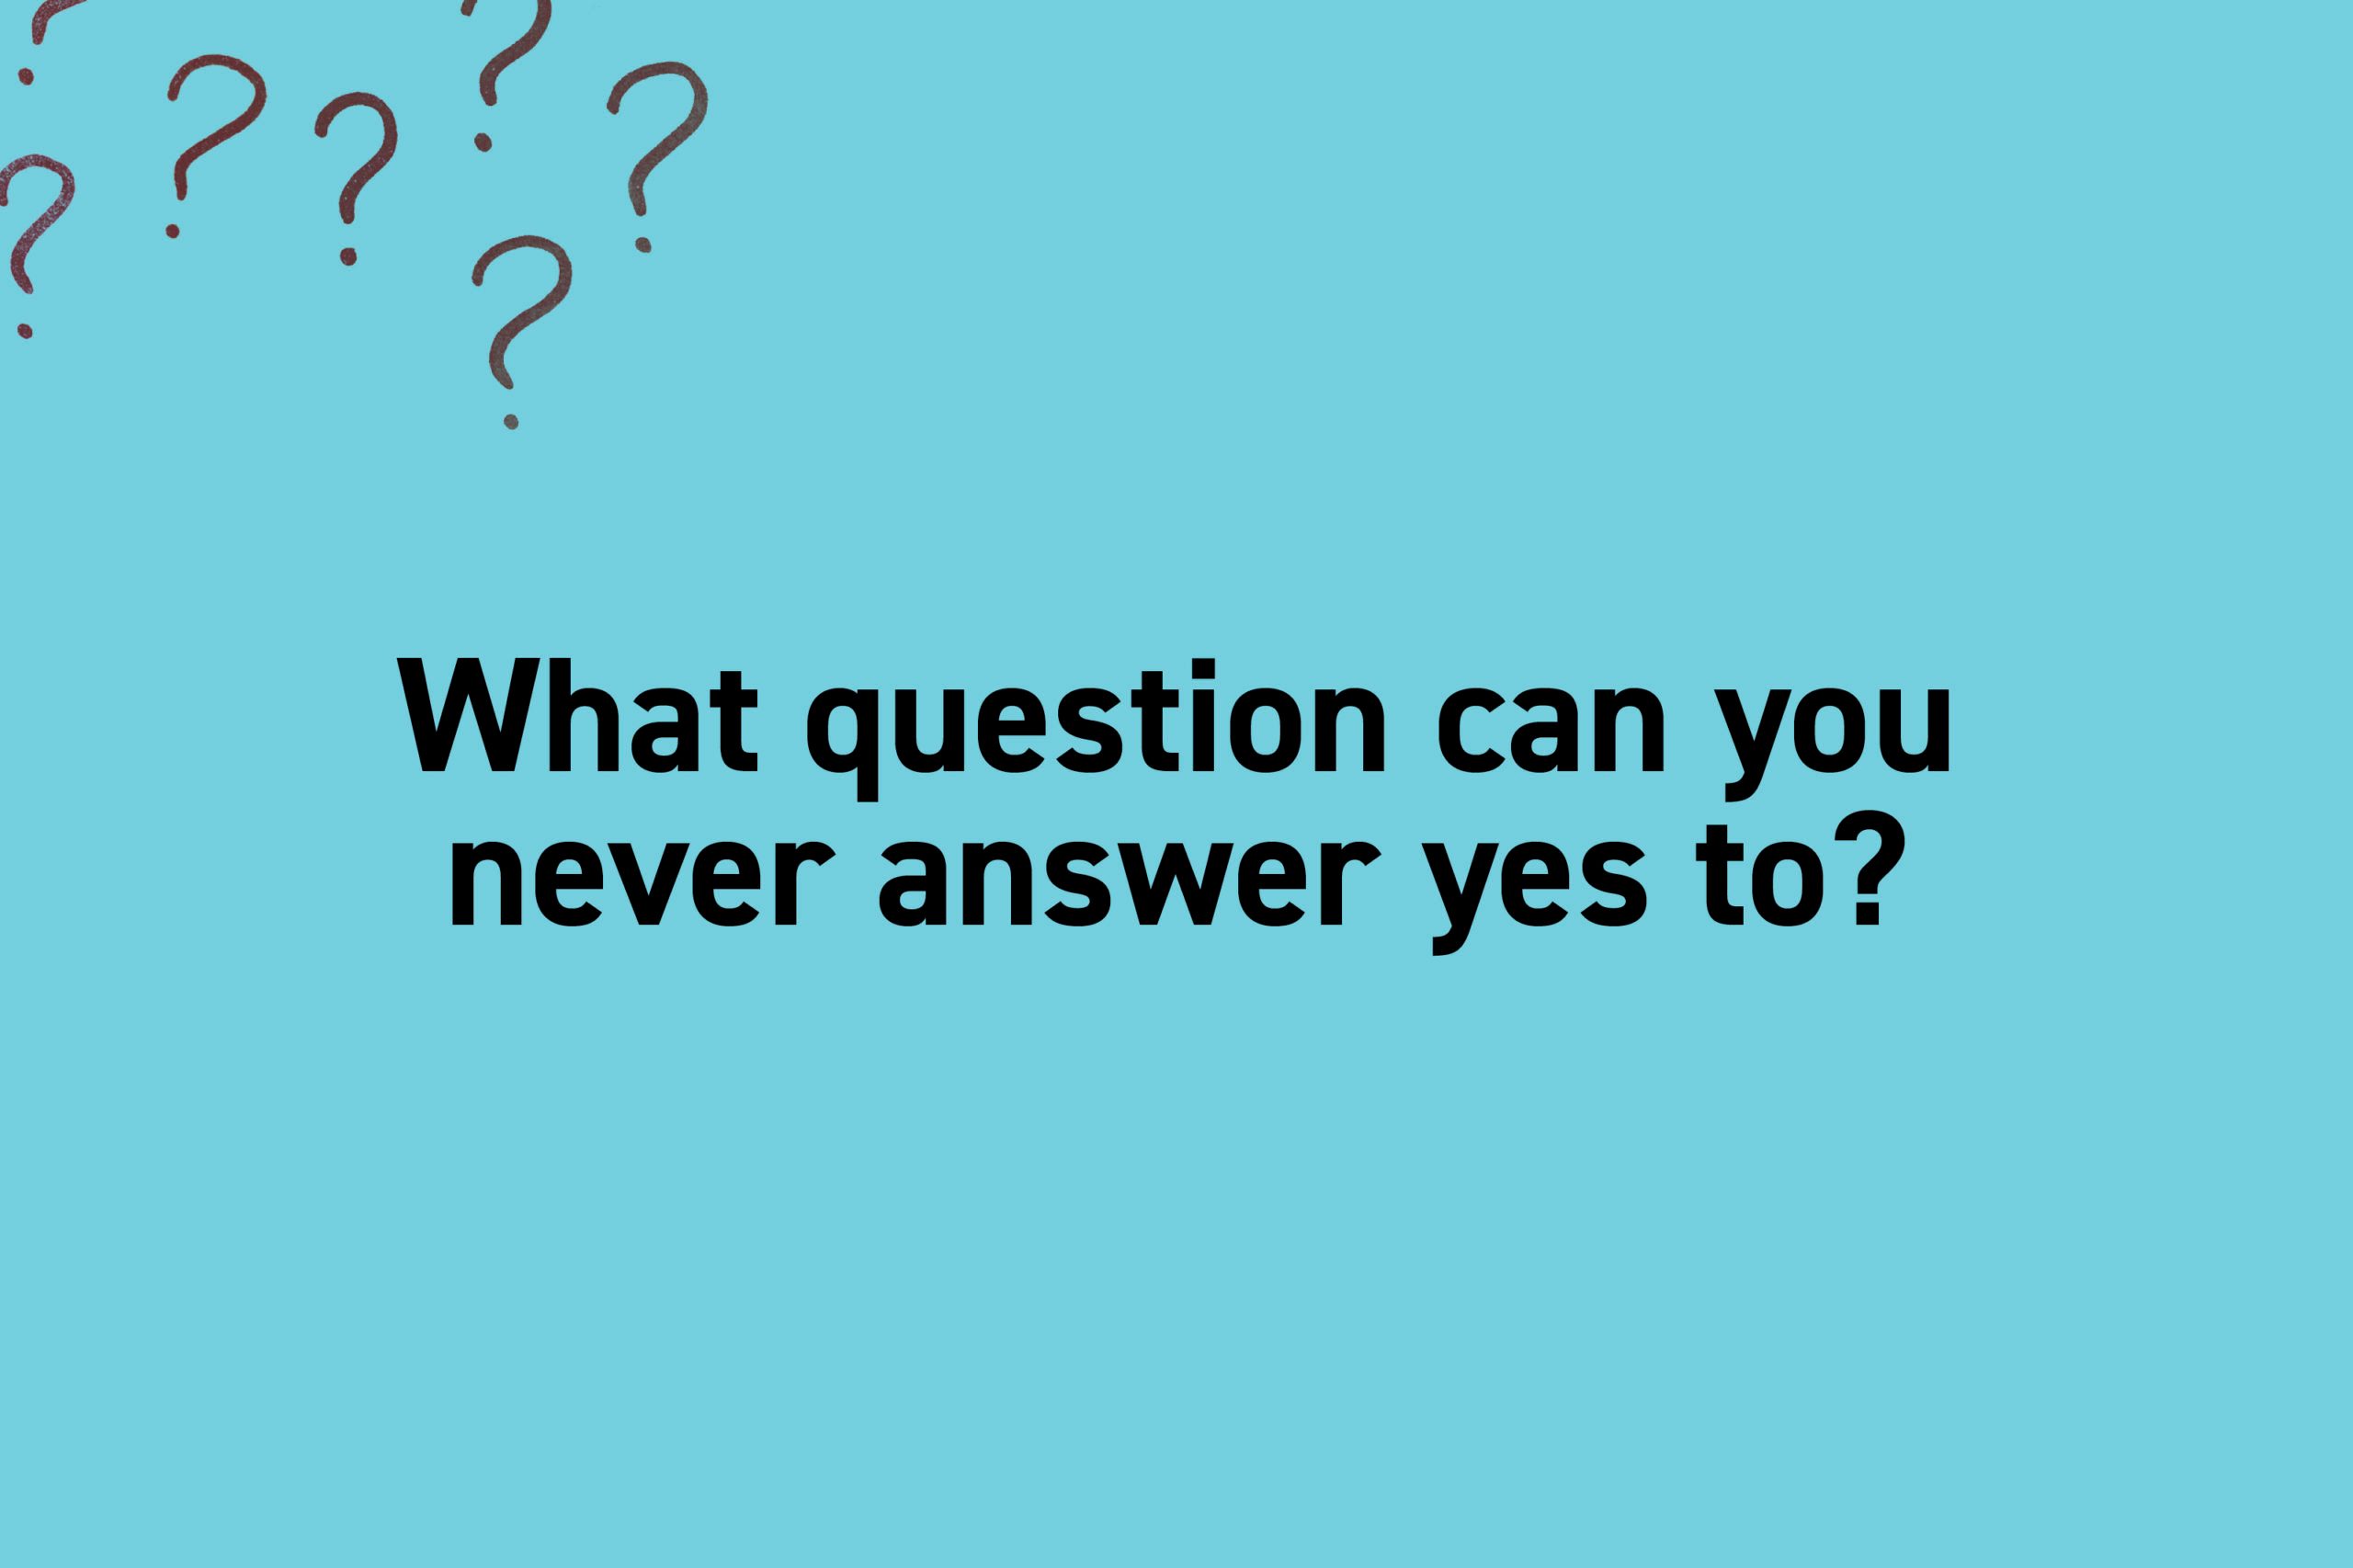 What question can you never answer yes to?